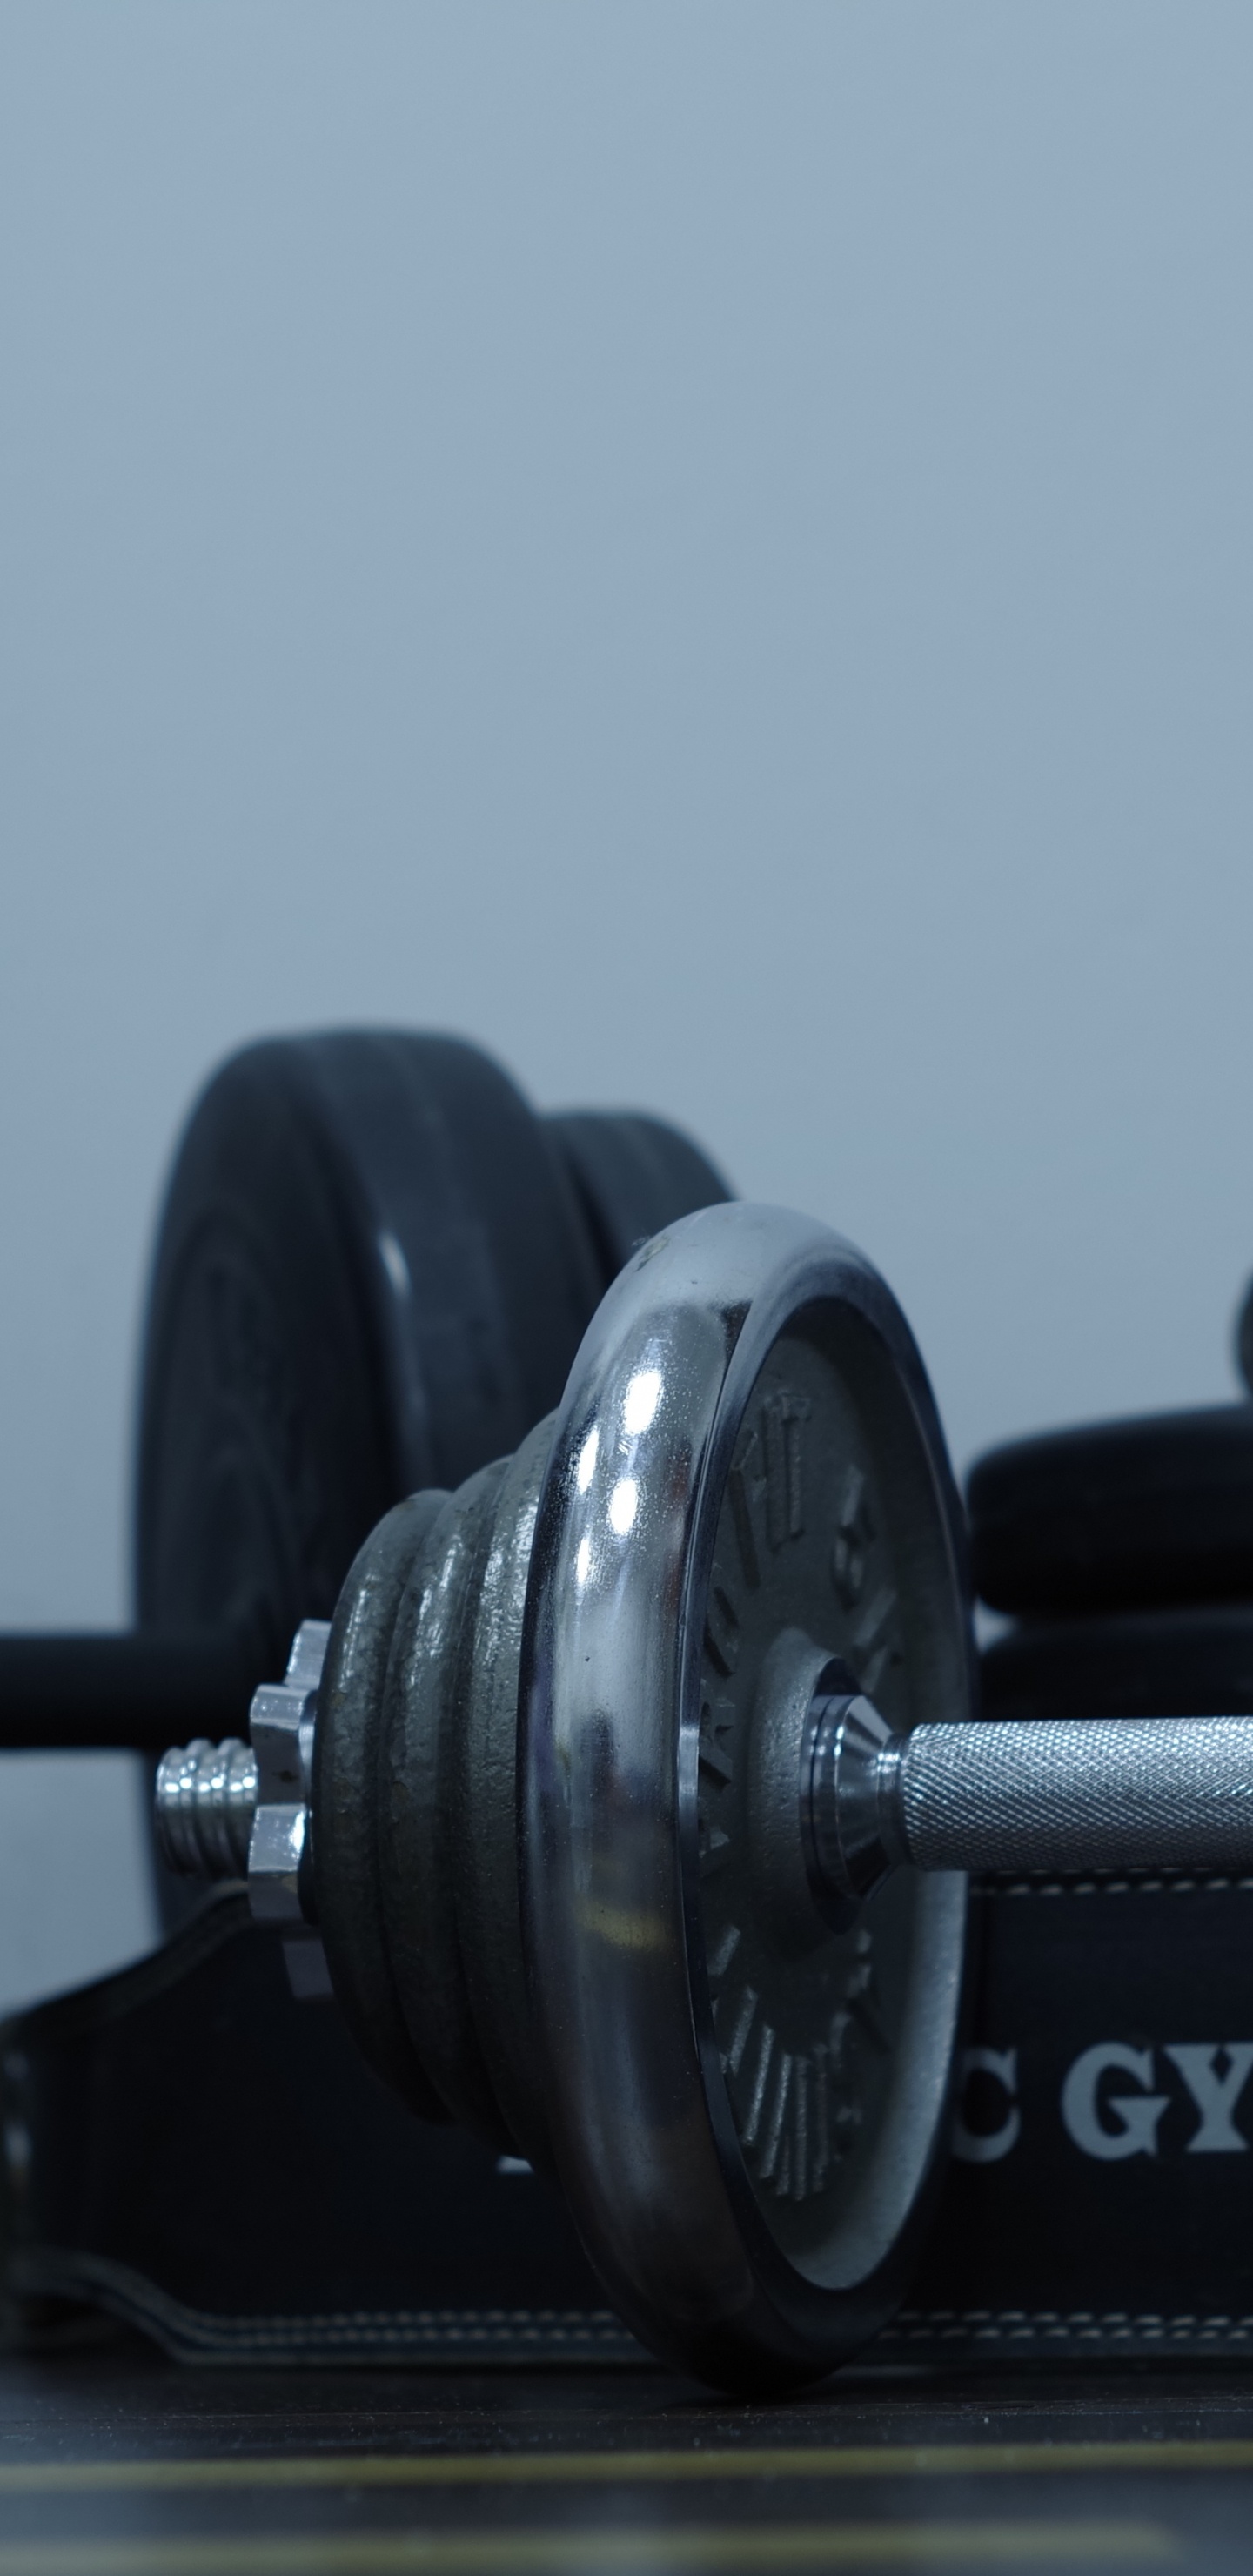 2 Black Dumbbells on Brown Wooden Table. Wallpaper in 1440x2960 Resolution